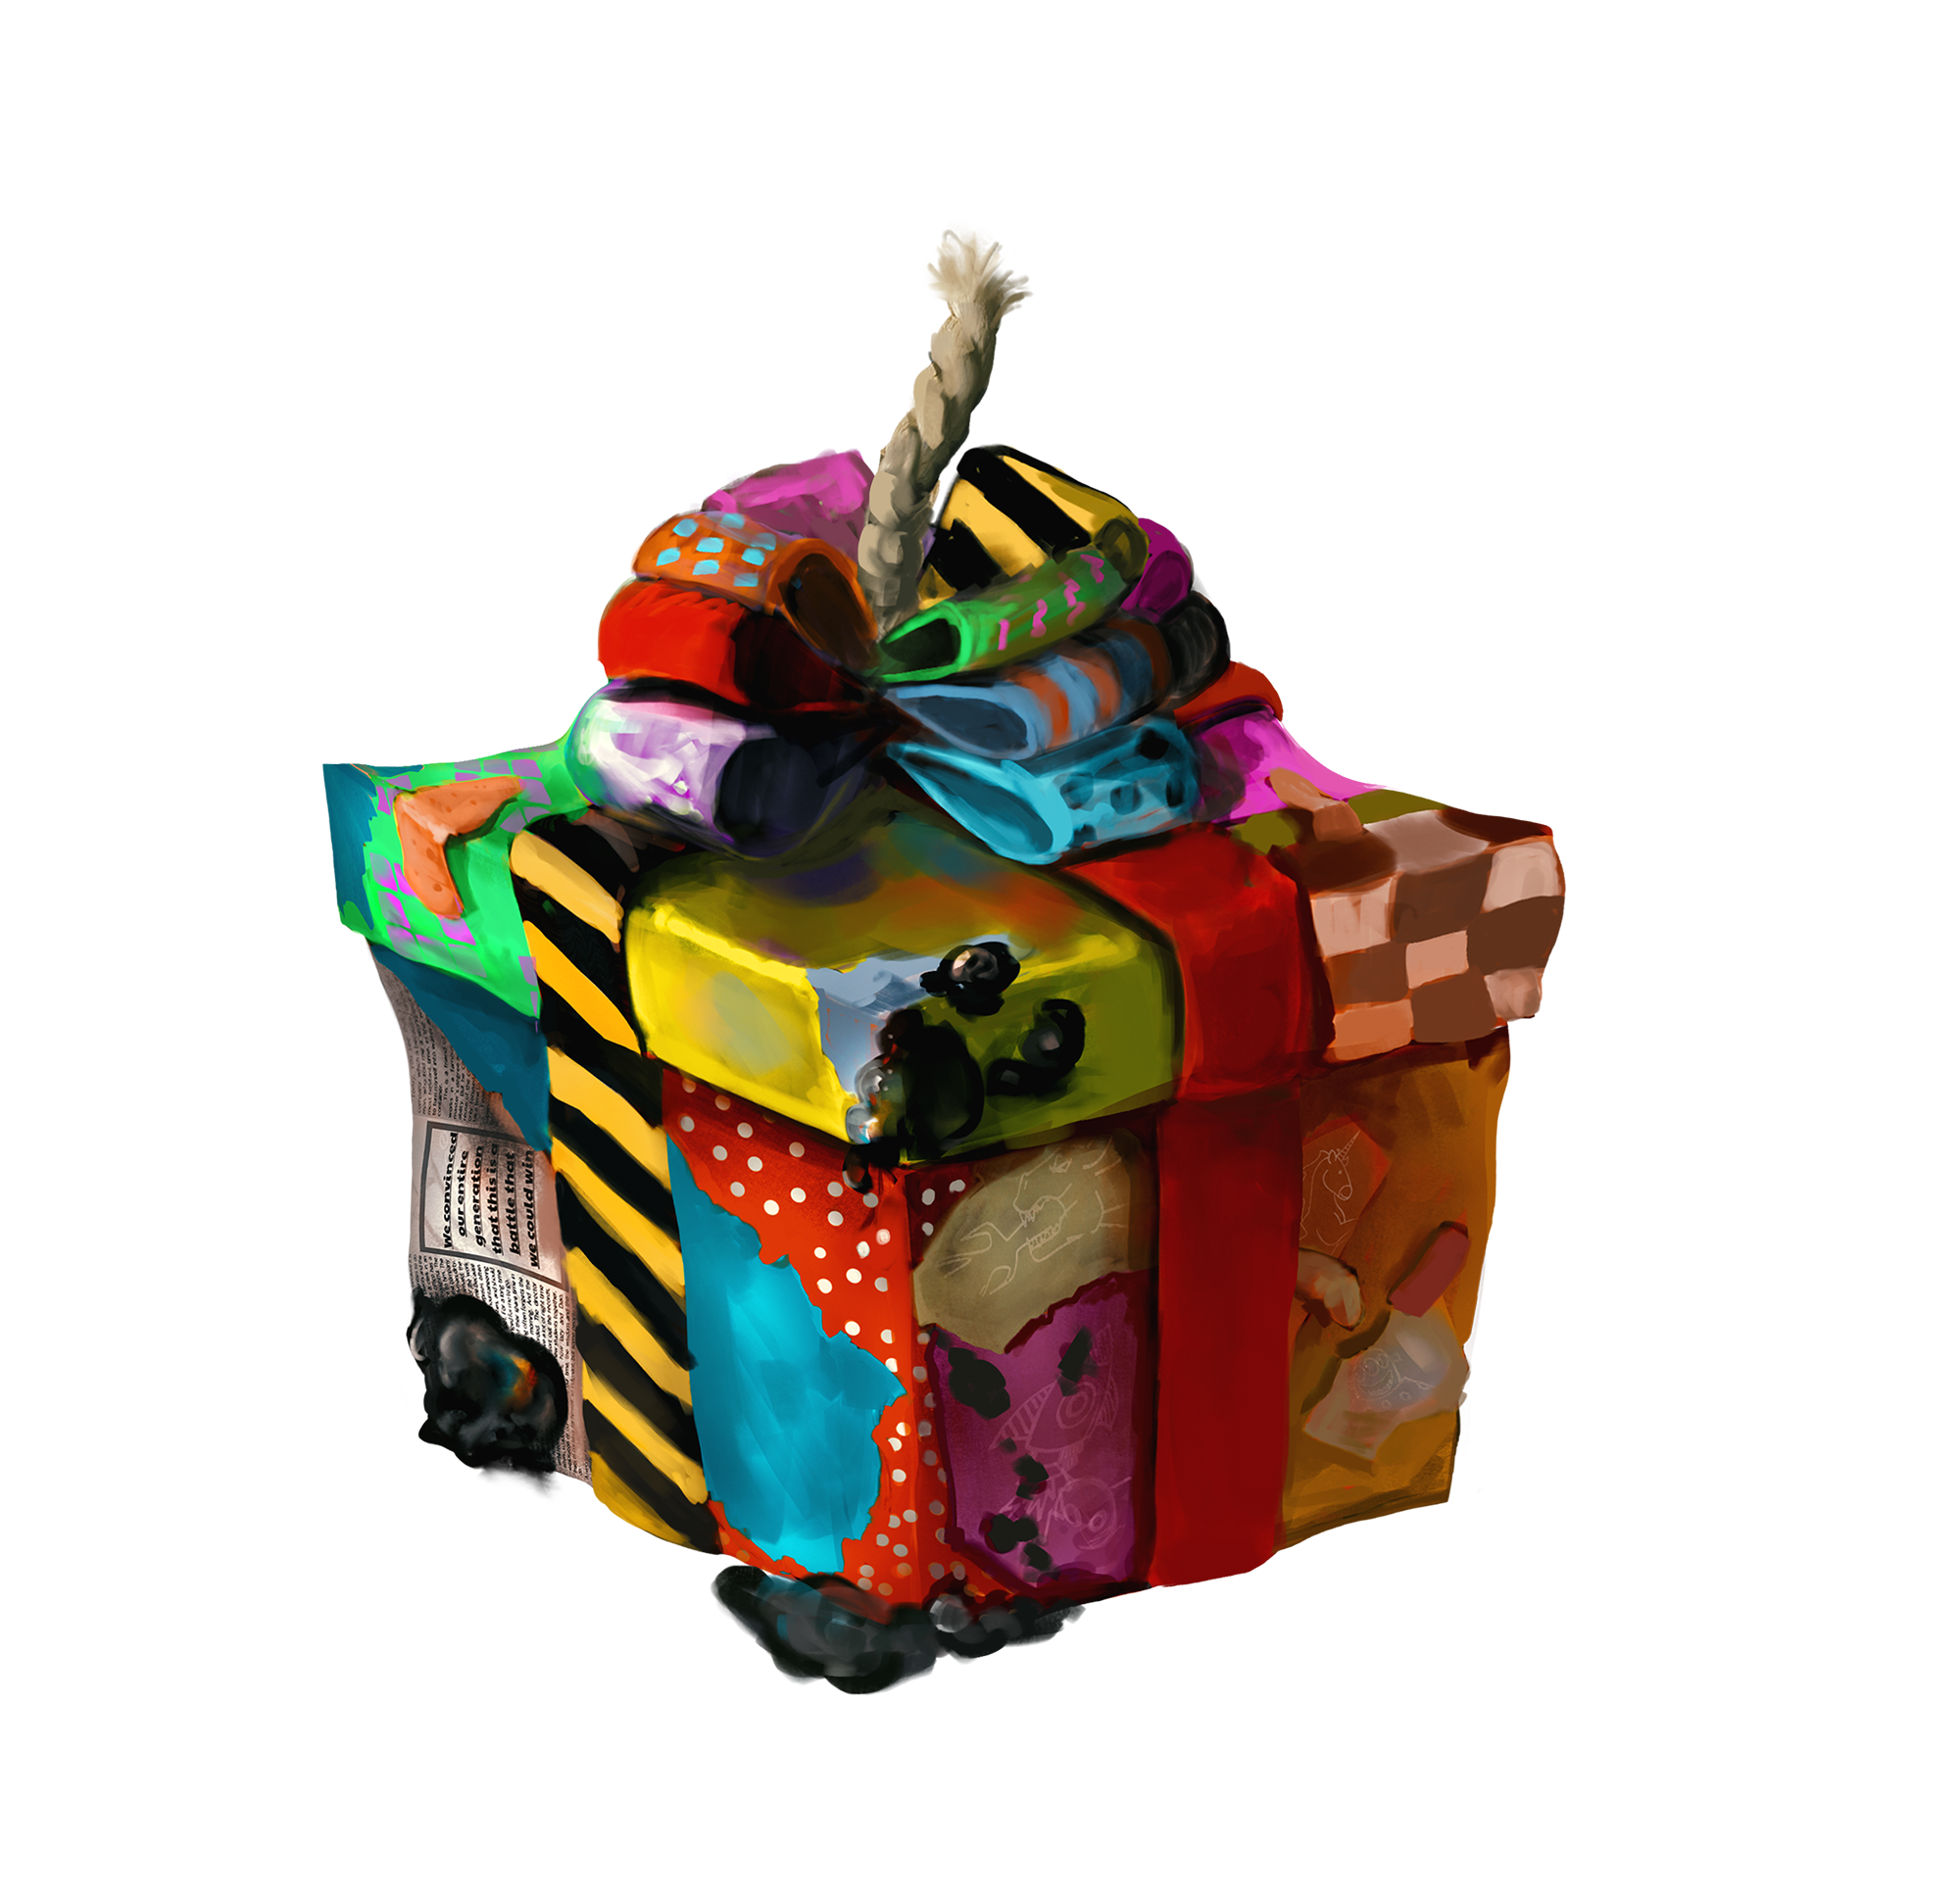 A huge gift box wrapped in a mish-mash of recycled paper, including crumpled news clippings, greasy food wrappers, mundane paperwork, and colorful gift wrap. The gift is topped by a giant, filthy, bow